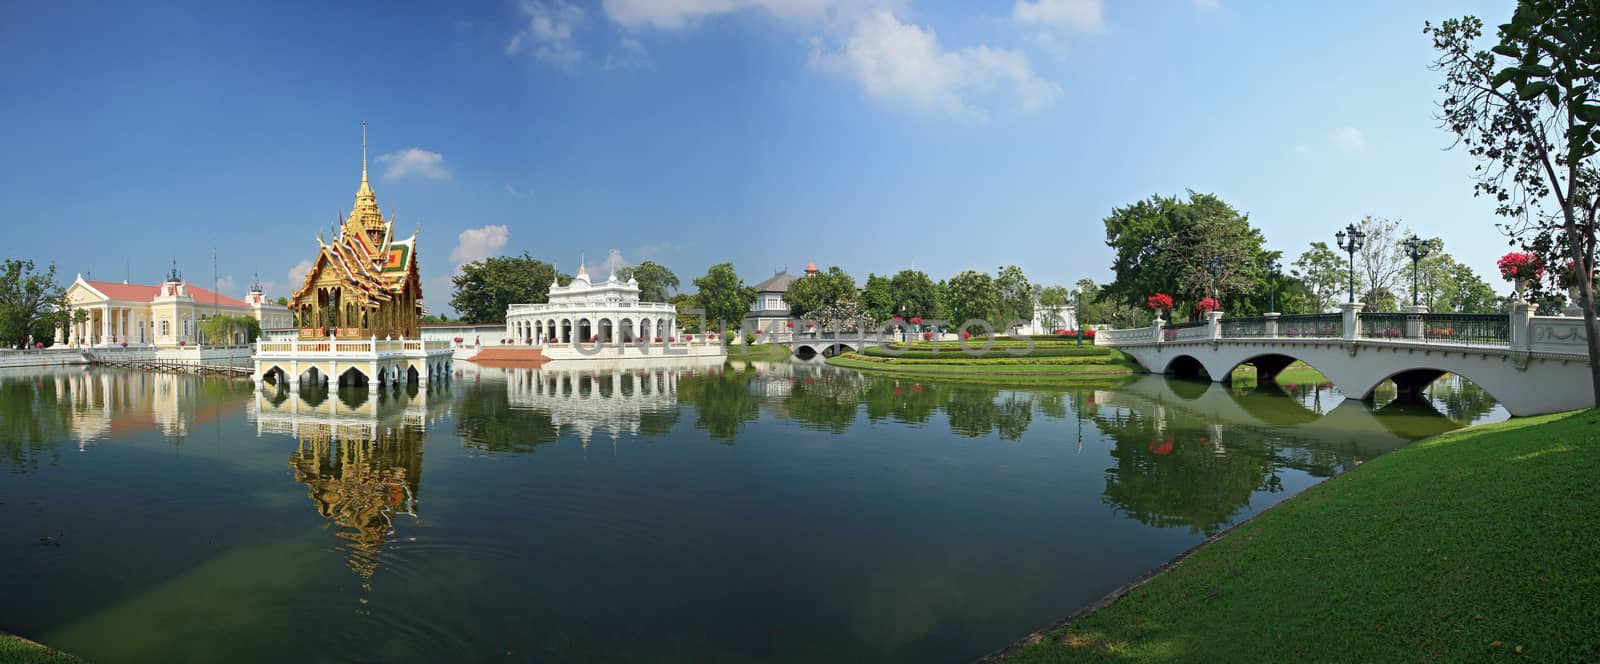 panoramic view of Bang Pa-In Palace in Thailand.